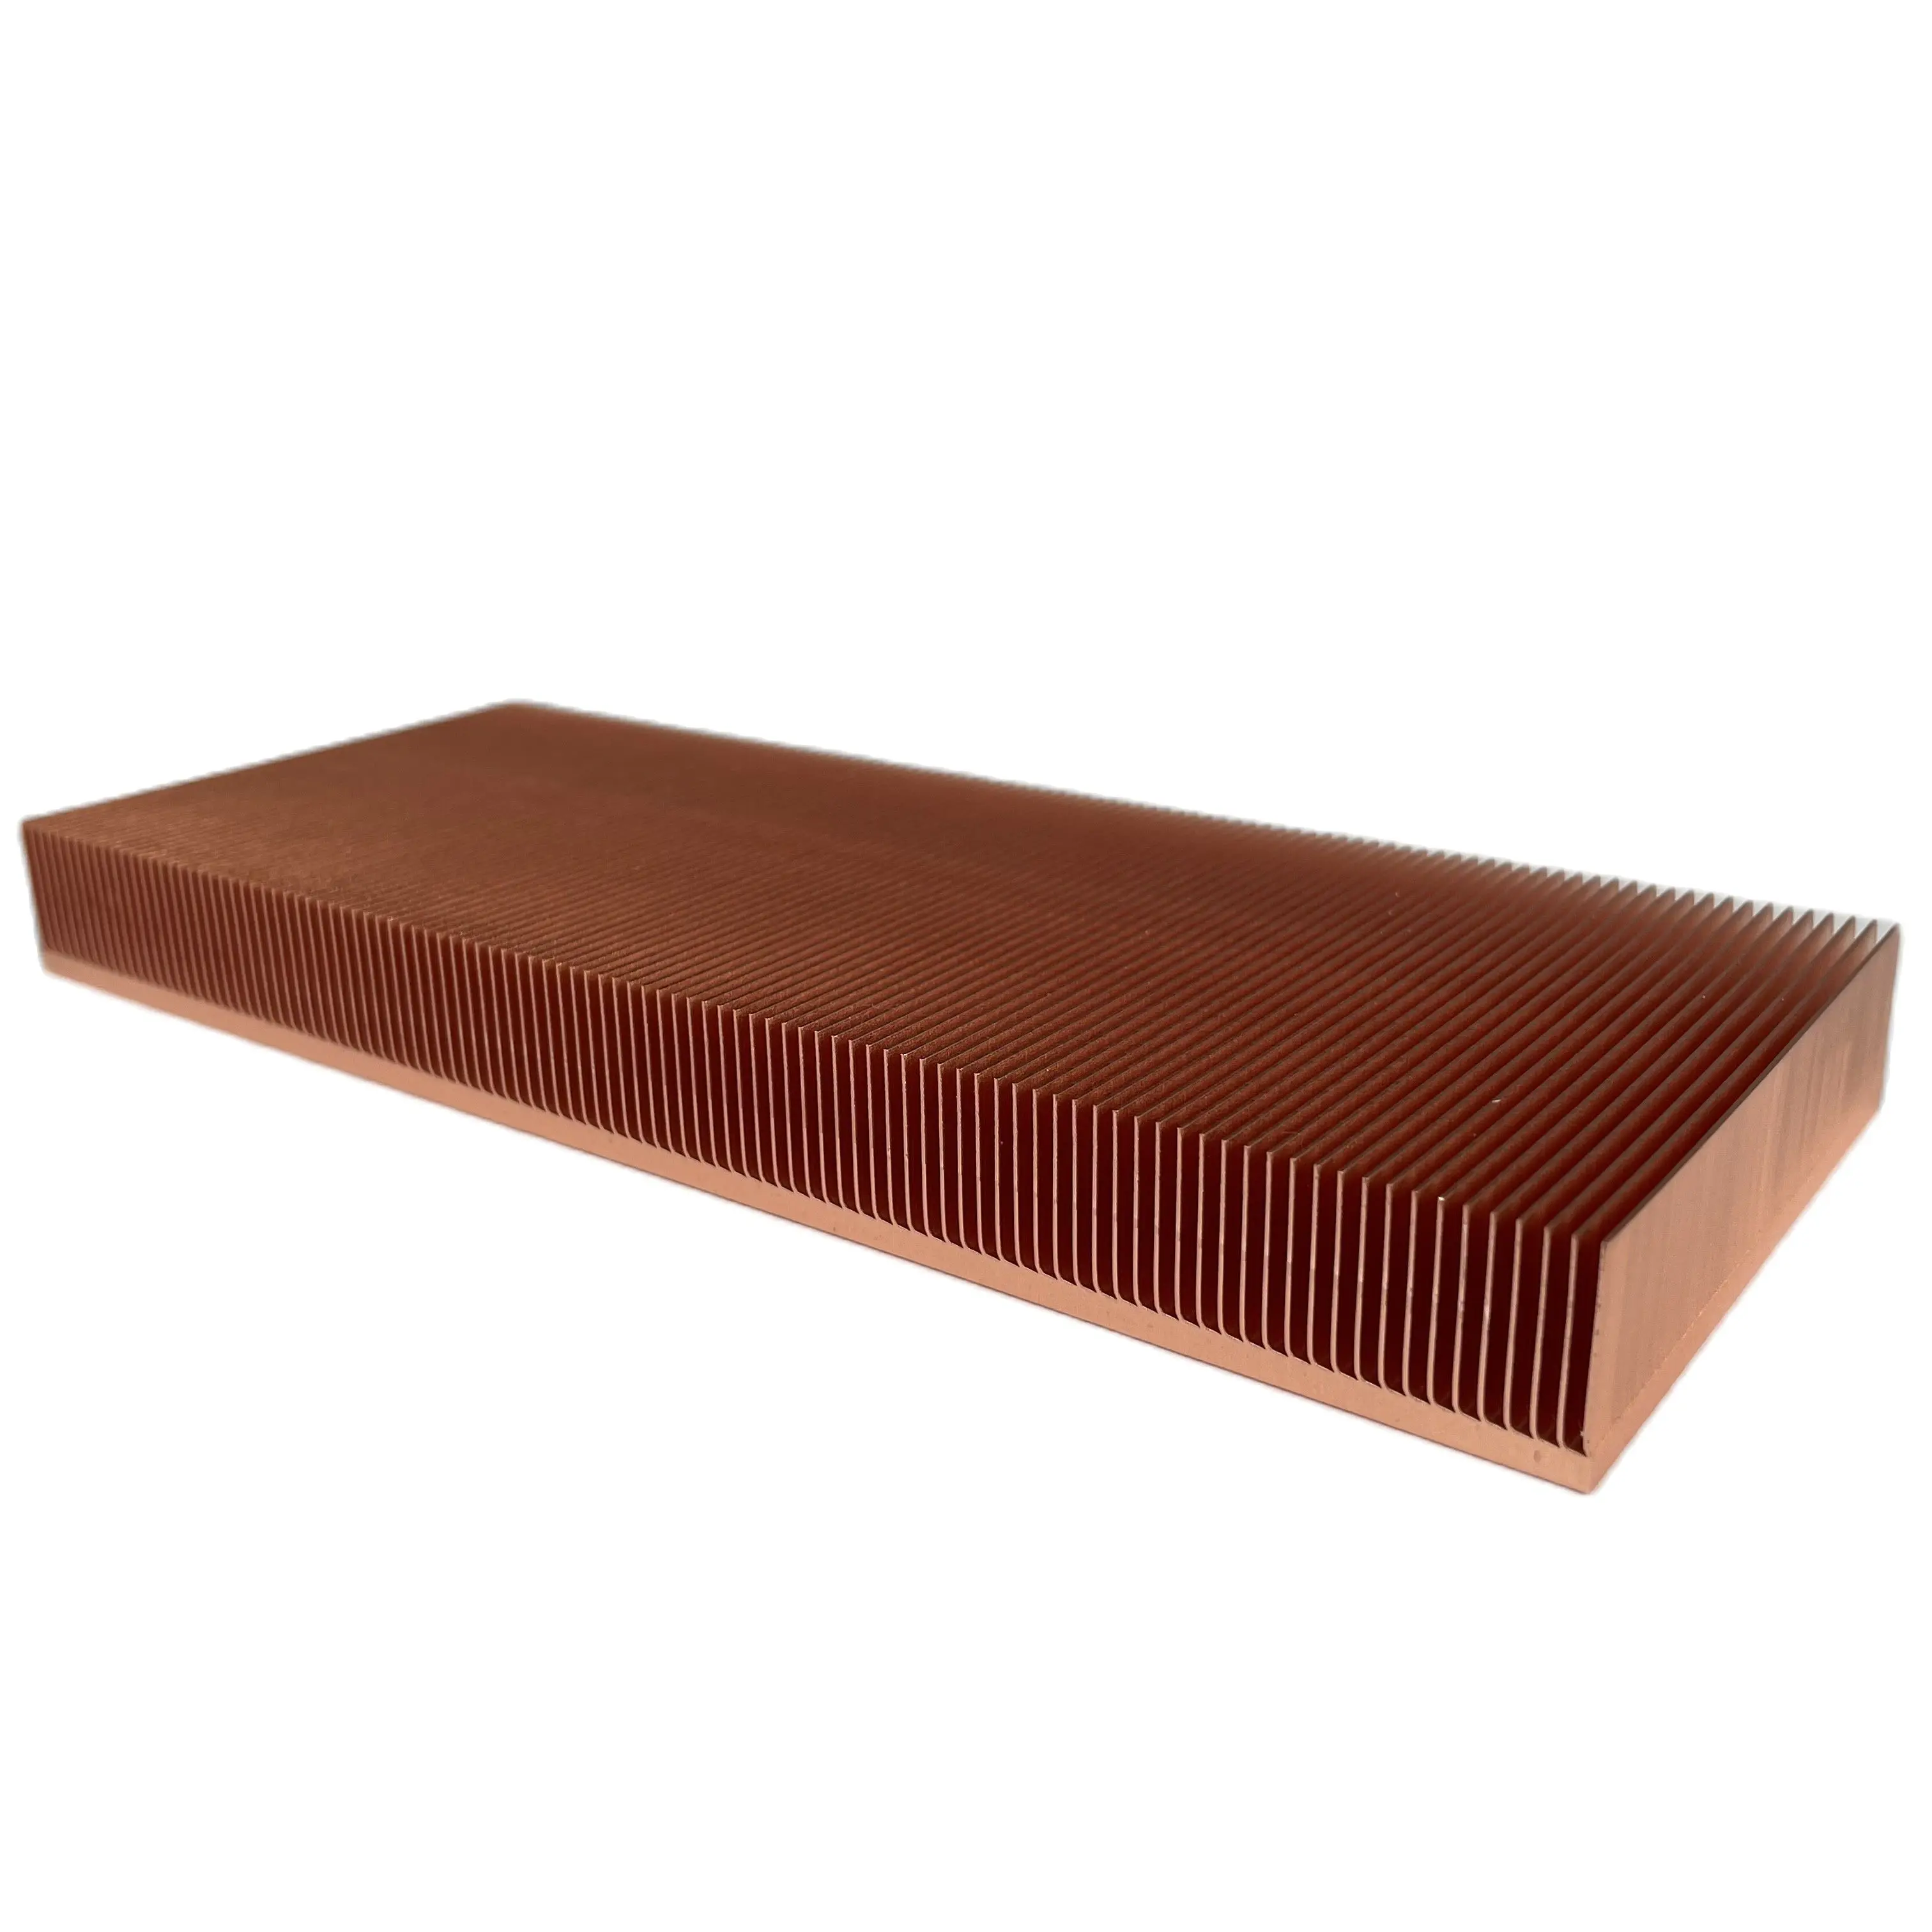 

High-power industrial equipment Pure Copper Radiator 200x80x20mm Skiving Fin Heat Sink For medical equipment projector